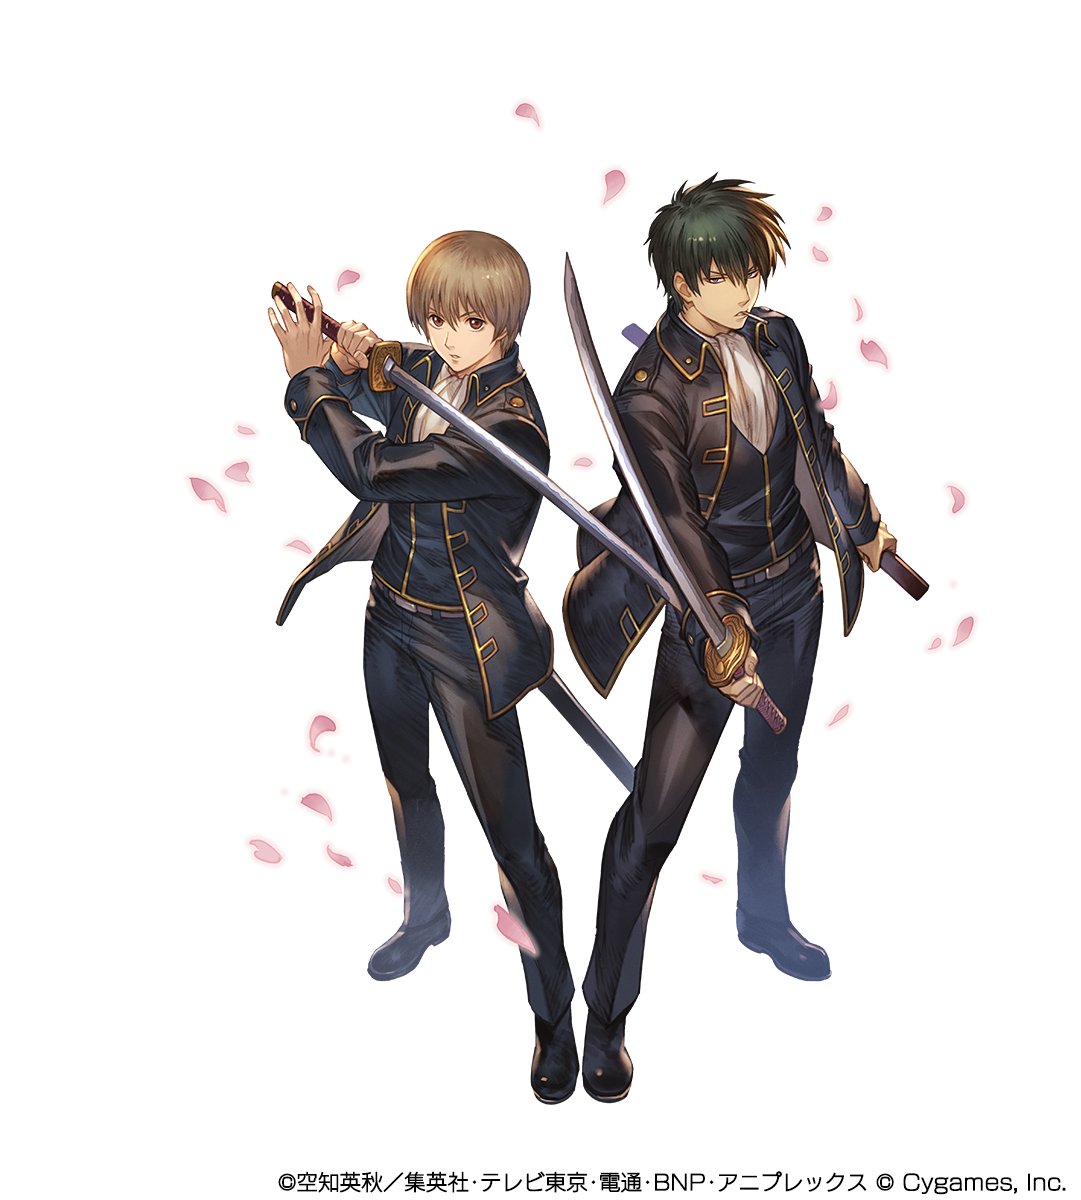 Granblue En Unofficial Check Out The Full Character Art For Hijikata Toshiro And Okita Sogo Who Will Join The Crew After Finishing Chapter 1 Episode 3 Of The Gin Tama